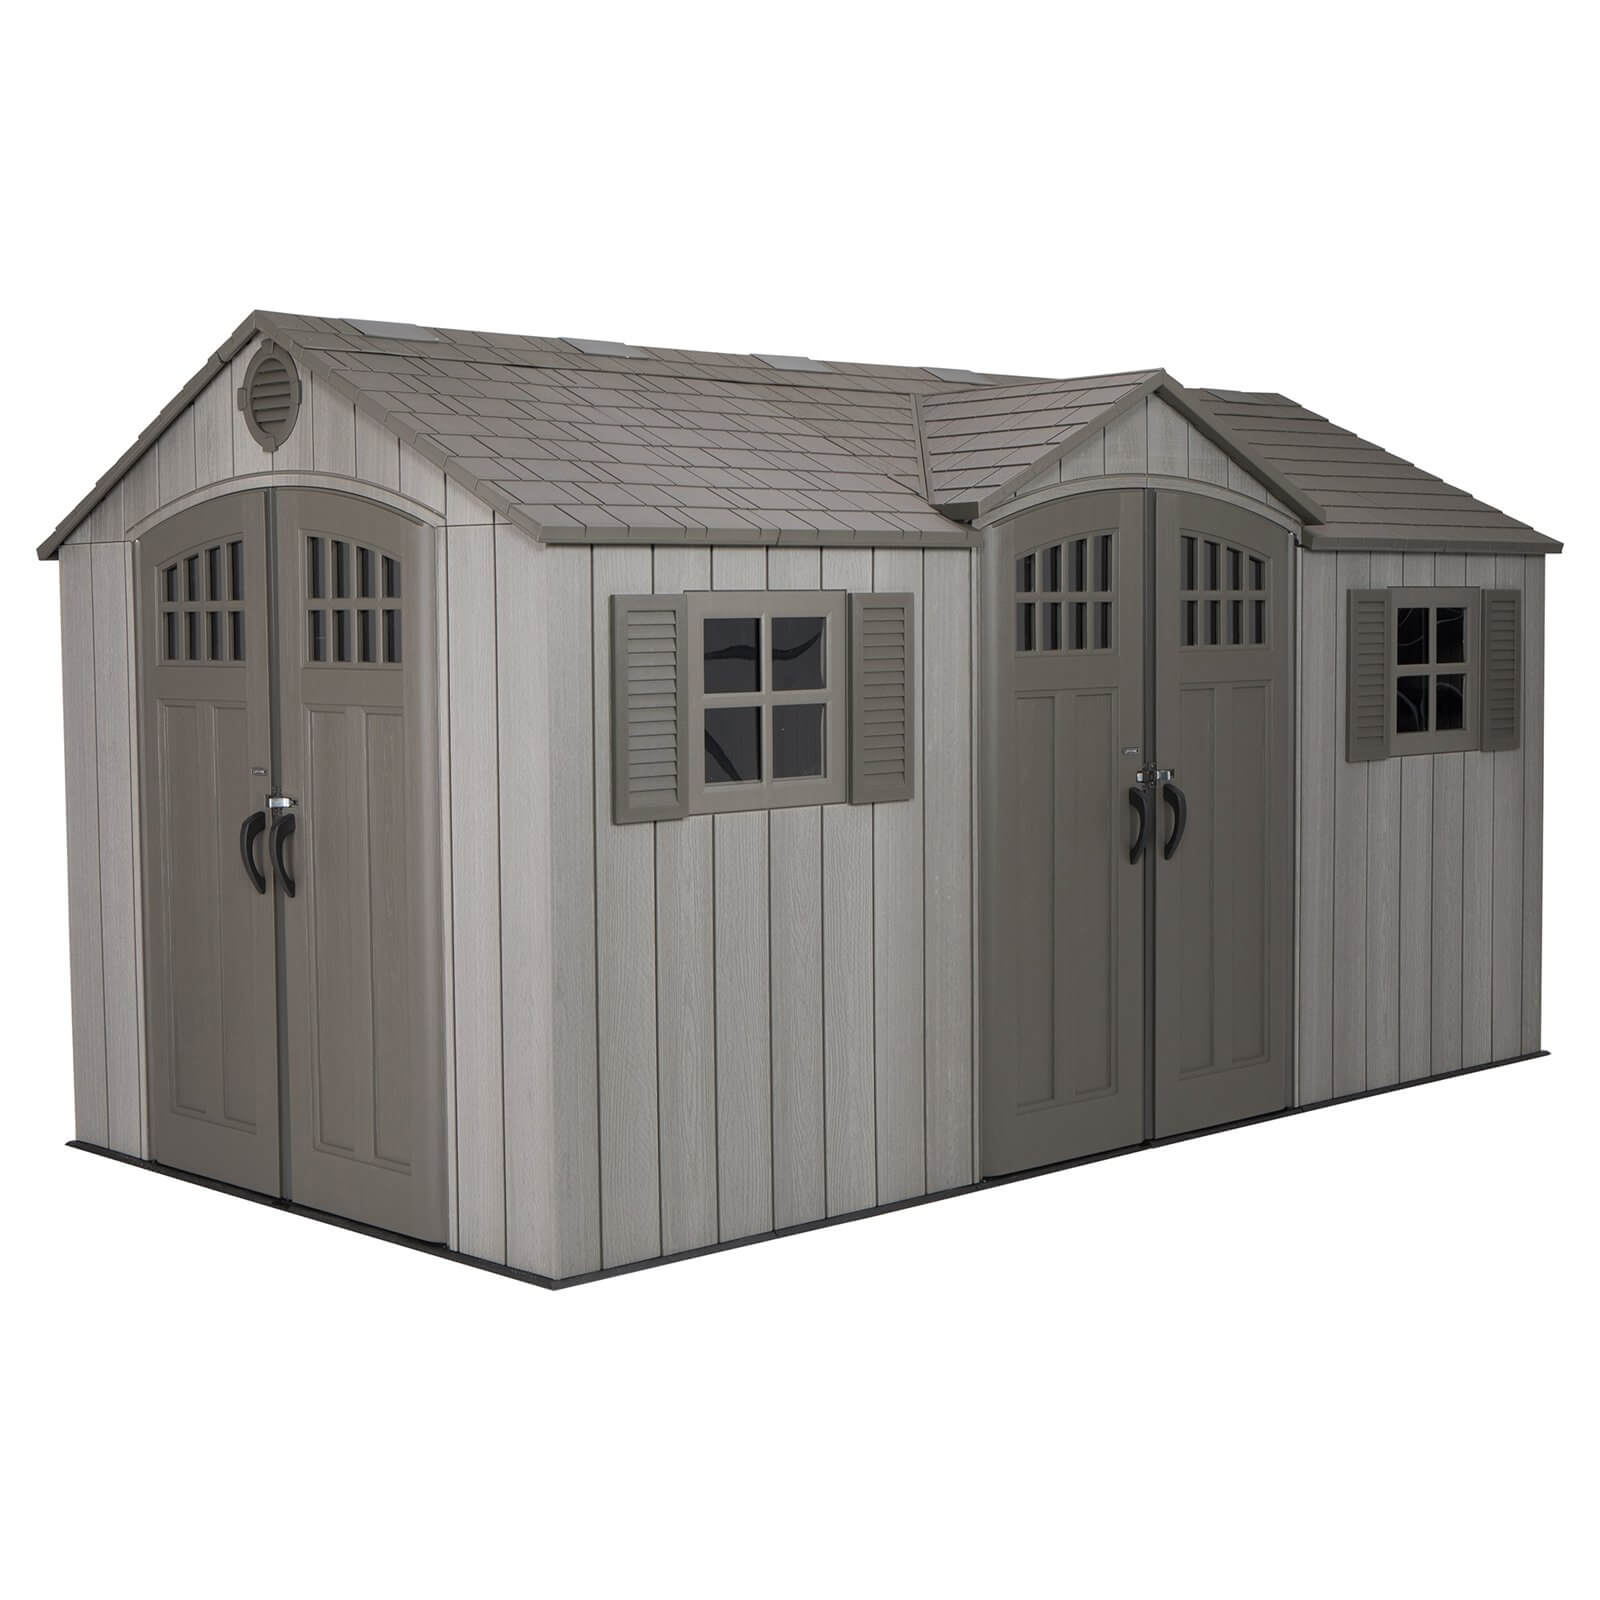 Photo of Lifetime 15x8 Ft Rough Cut Dual Entry Outdoor Storage Shed